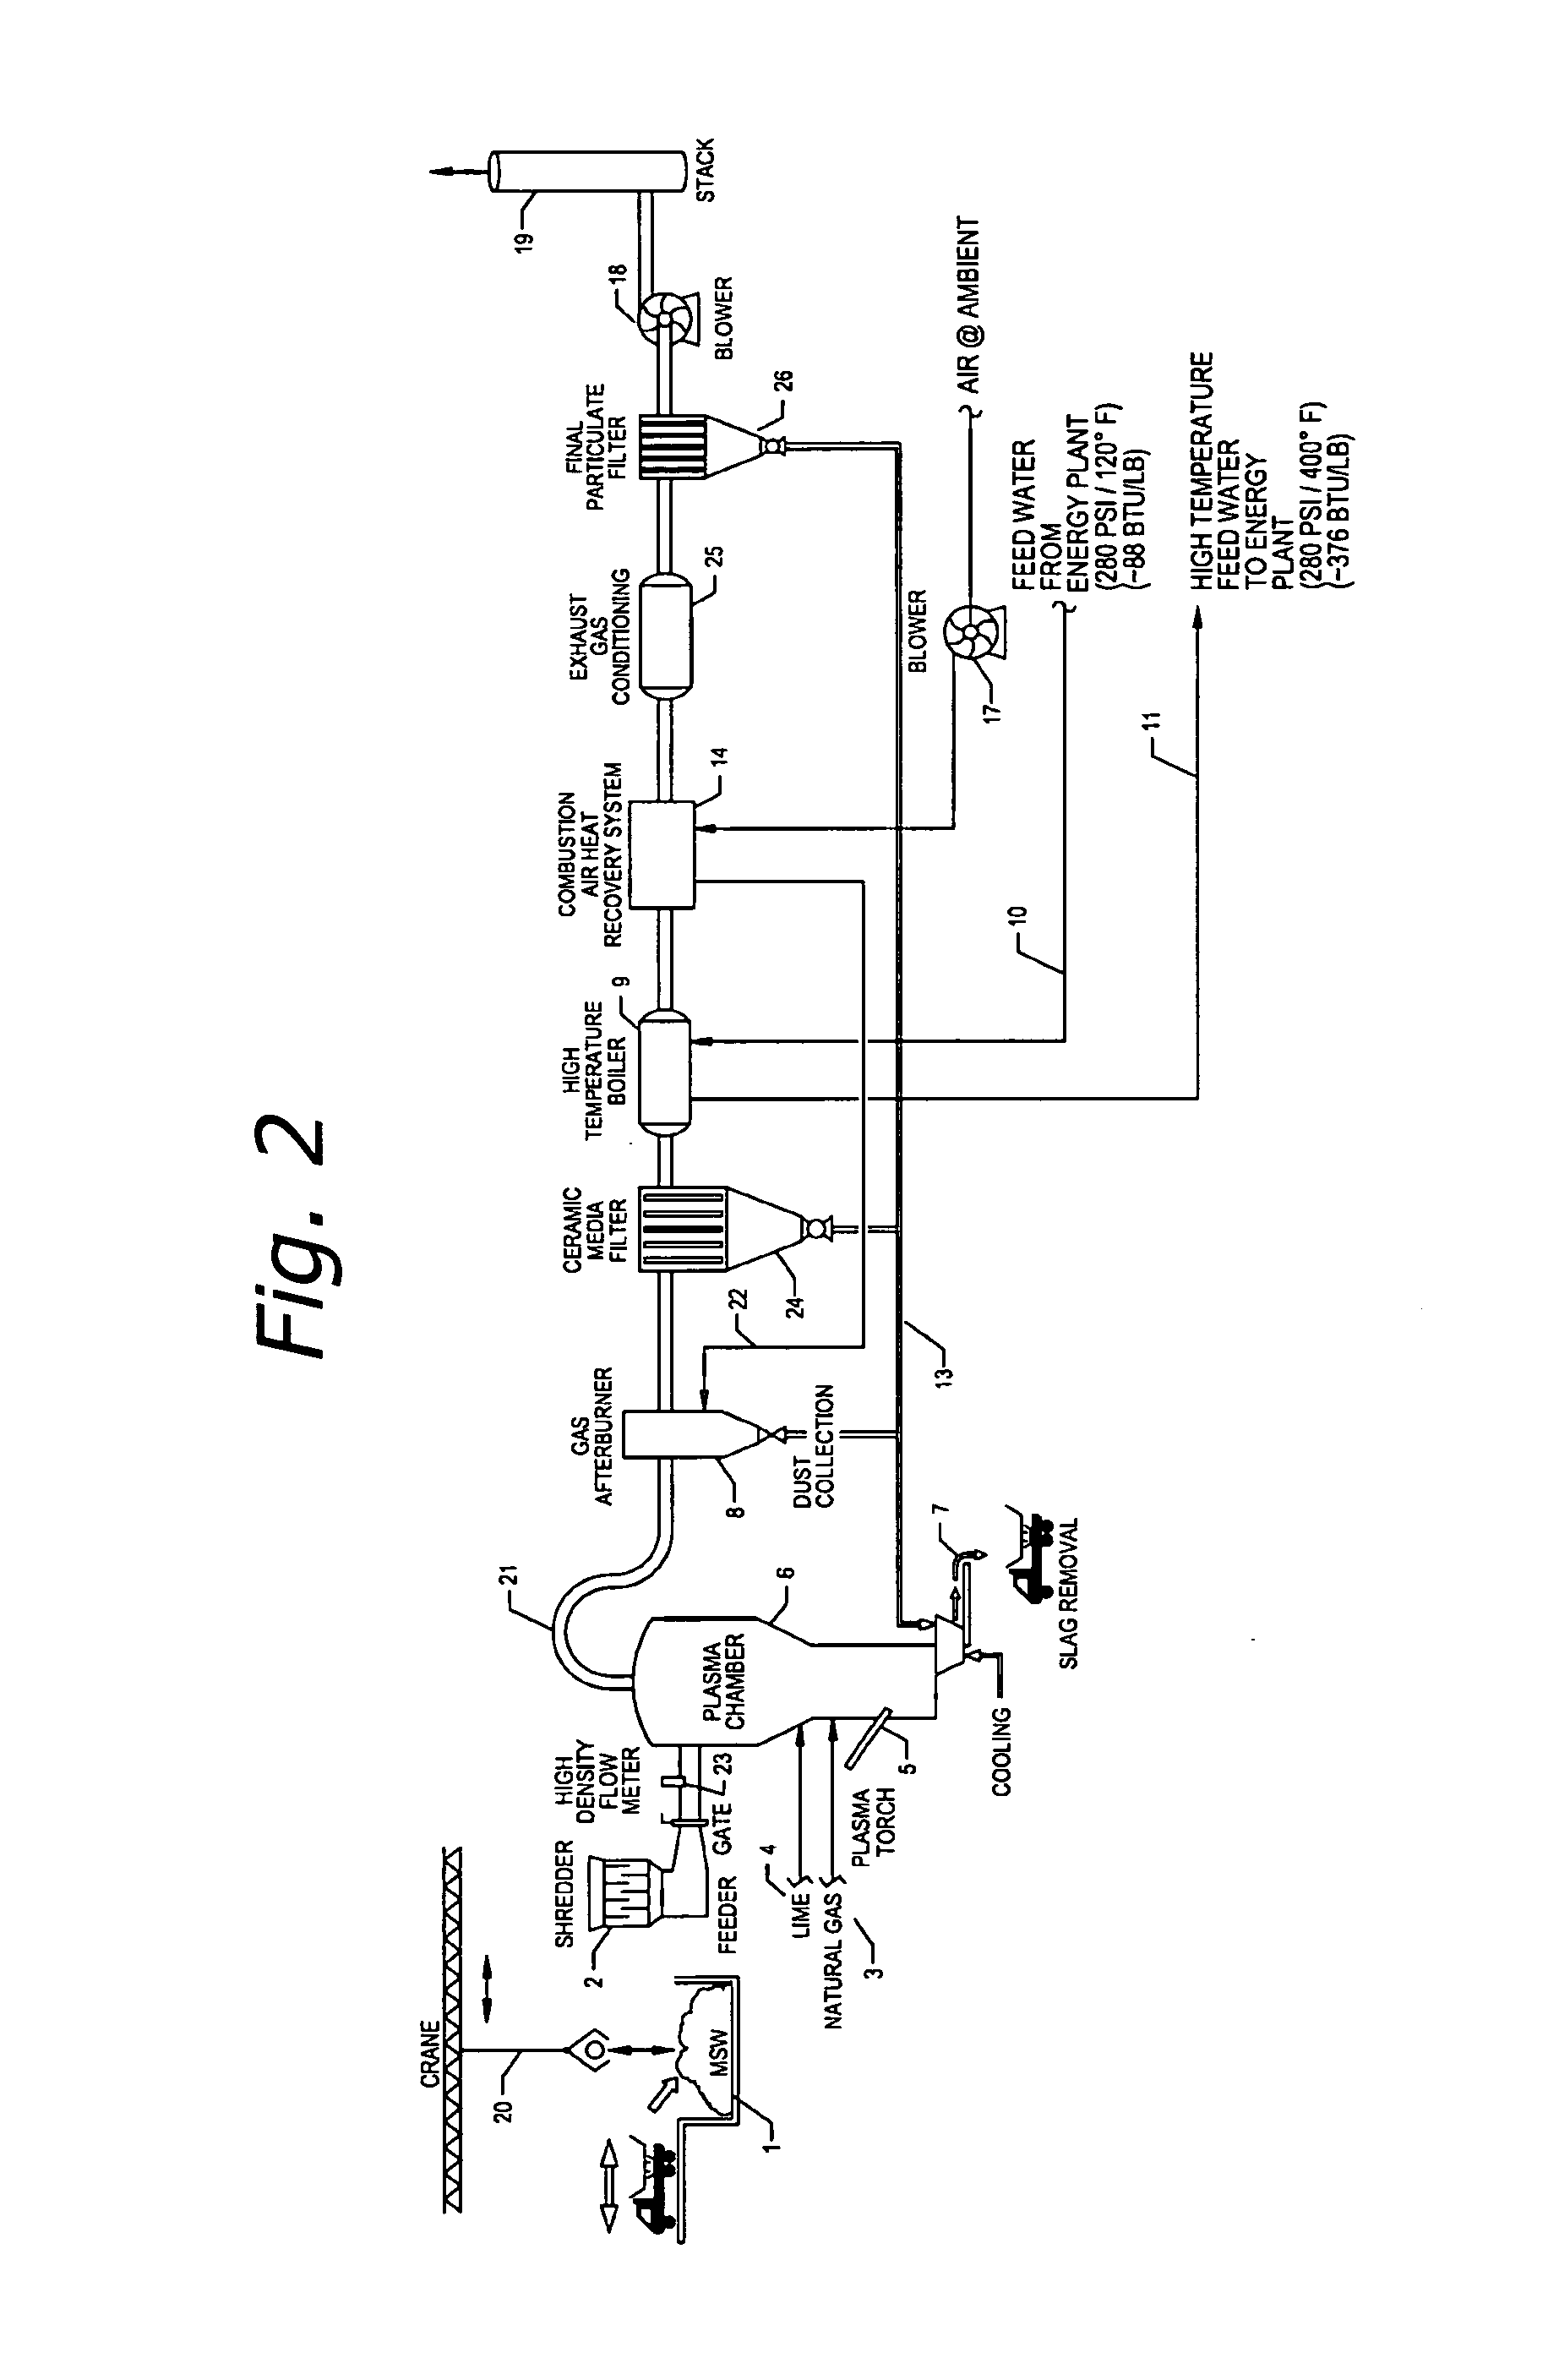 Plasma Feedwater and/or Make Up Water Energy Transfer System